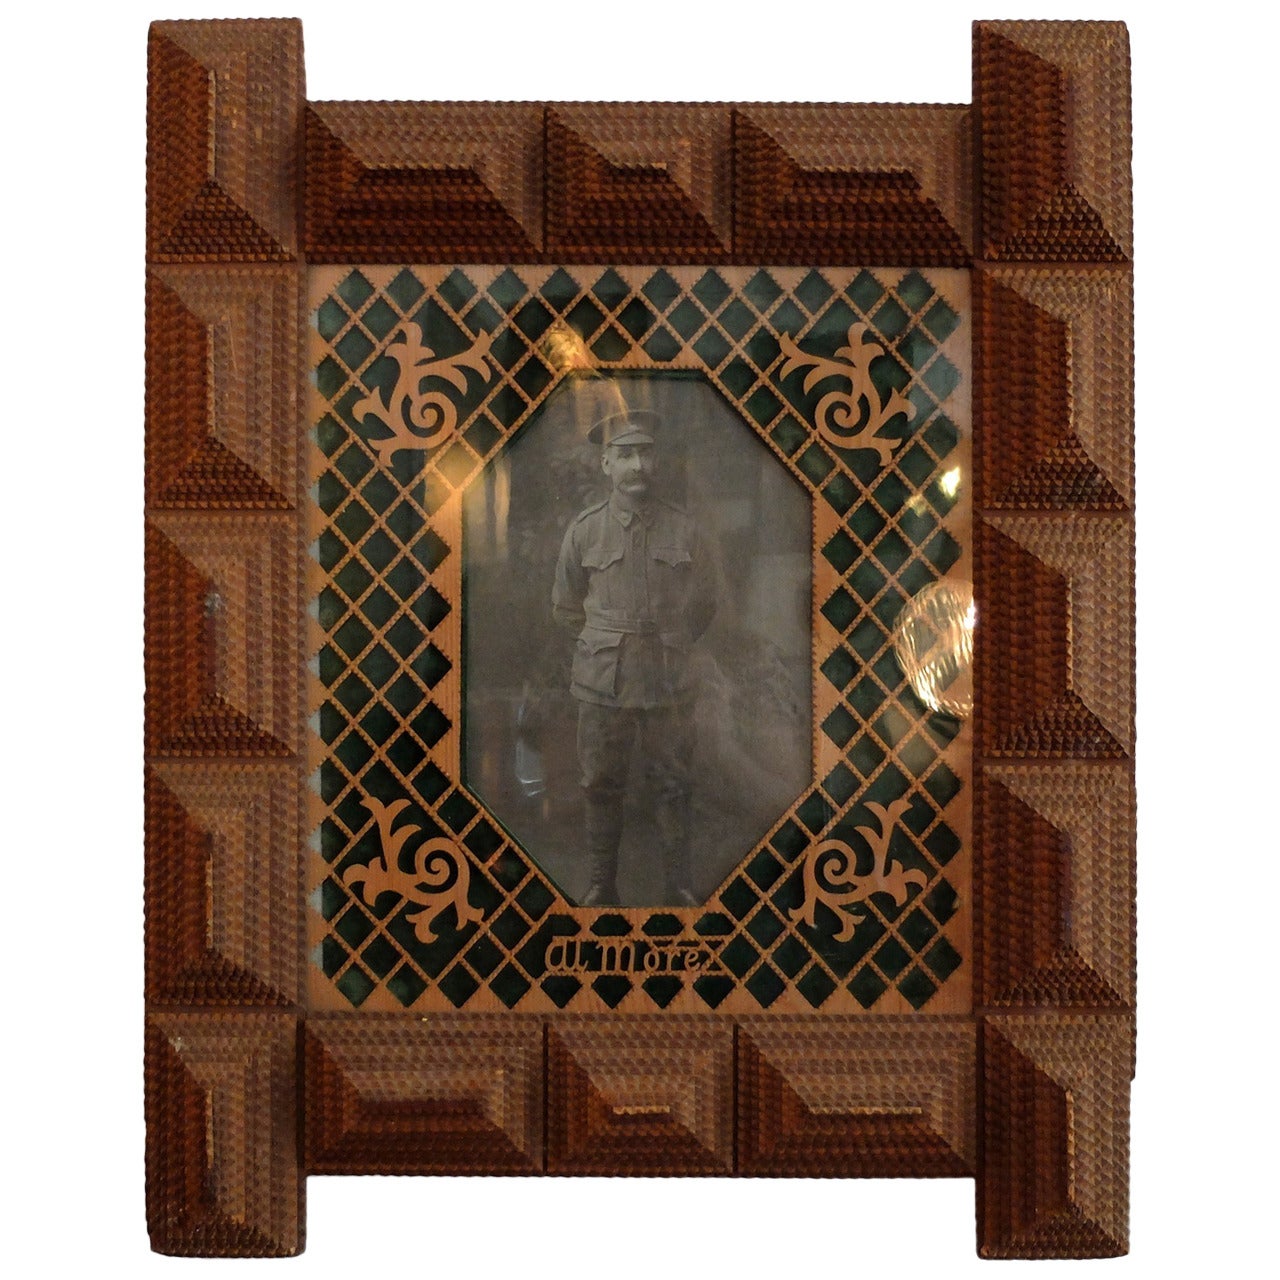 Large Tramp Art Frame with Portrait of WWI Soldier For Sale